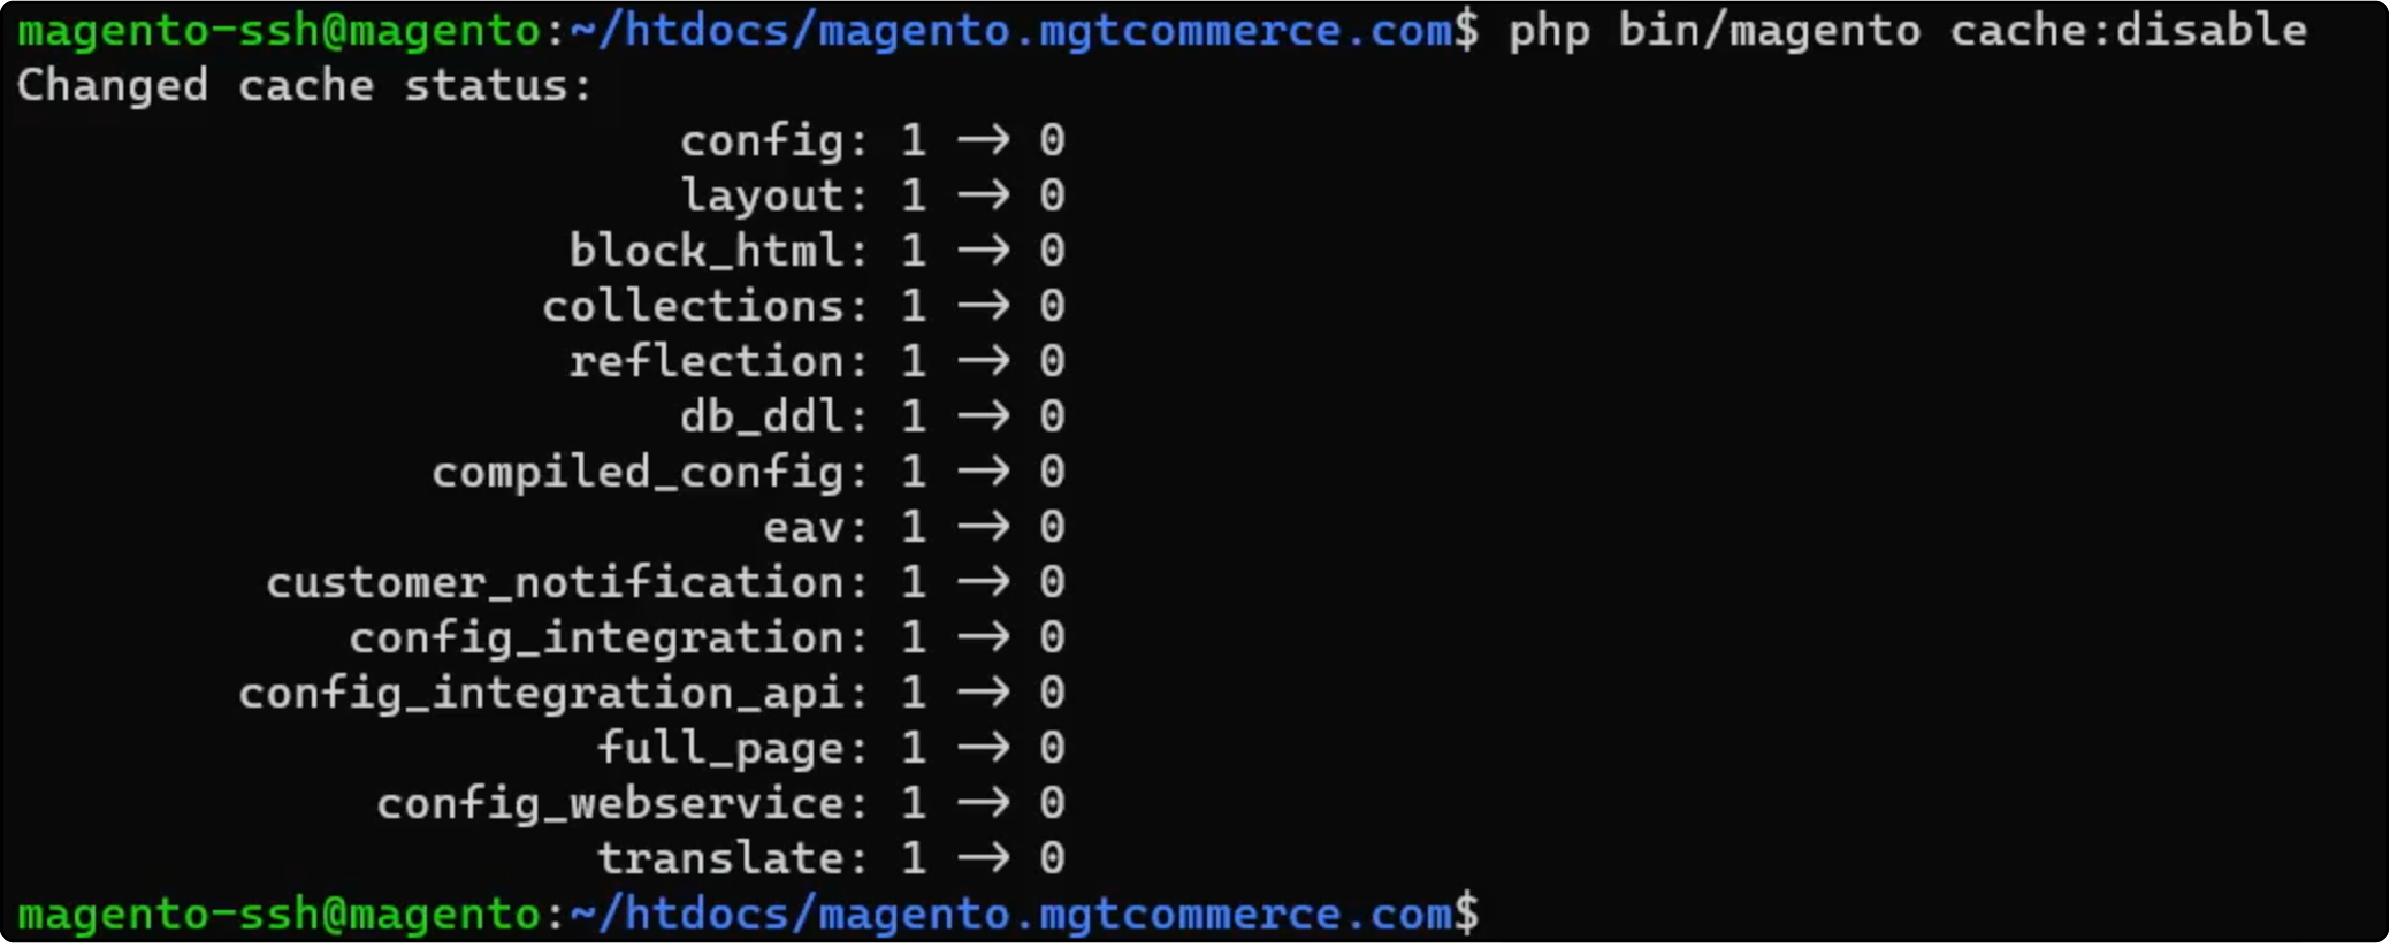 Command Line Steps to Disable Cache in Magento 2 for Website Updates